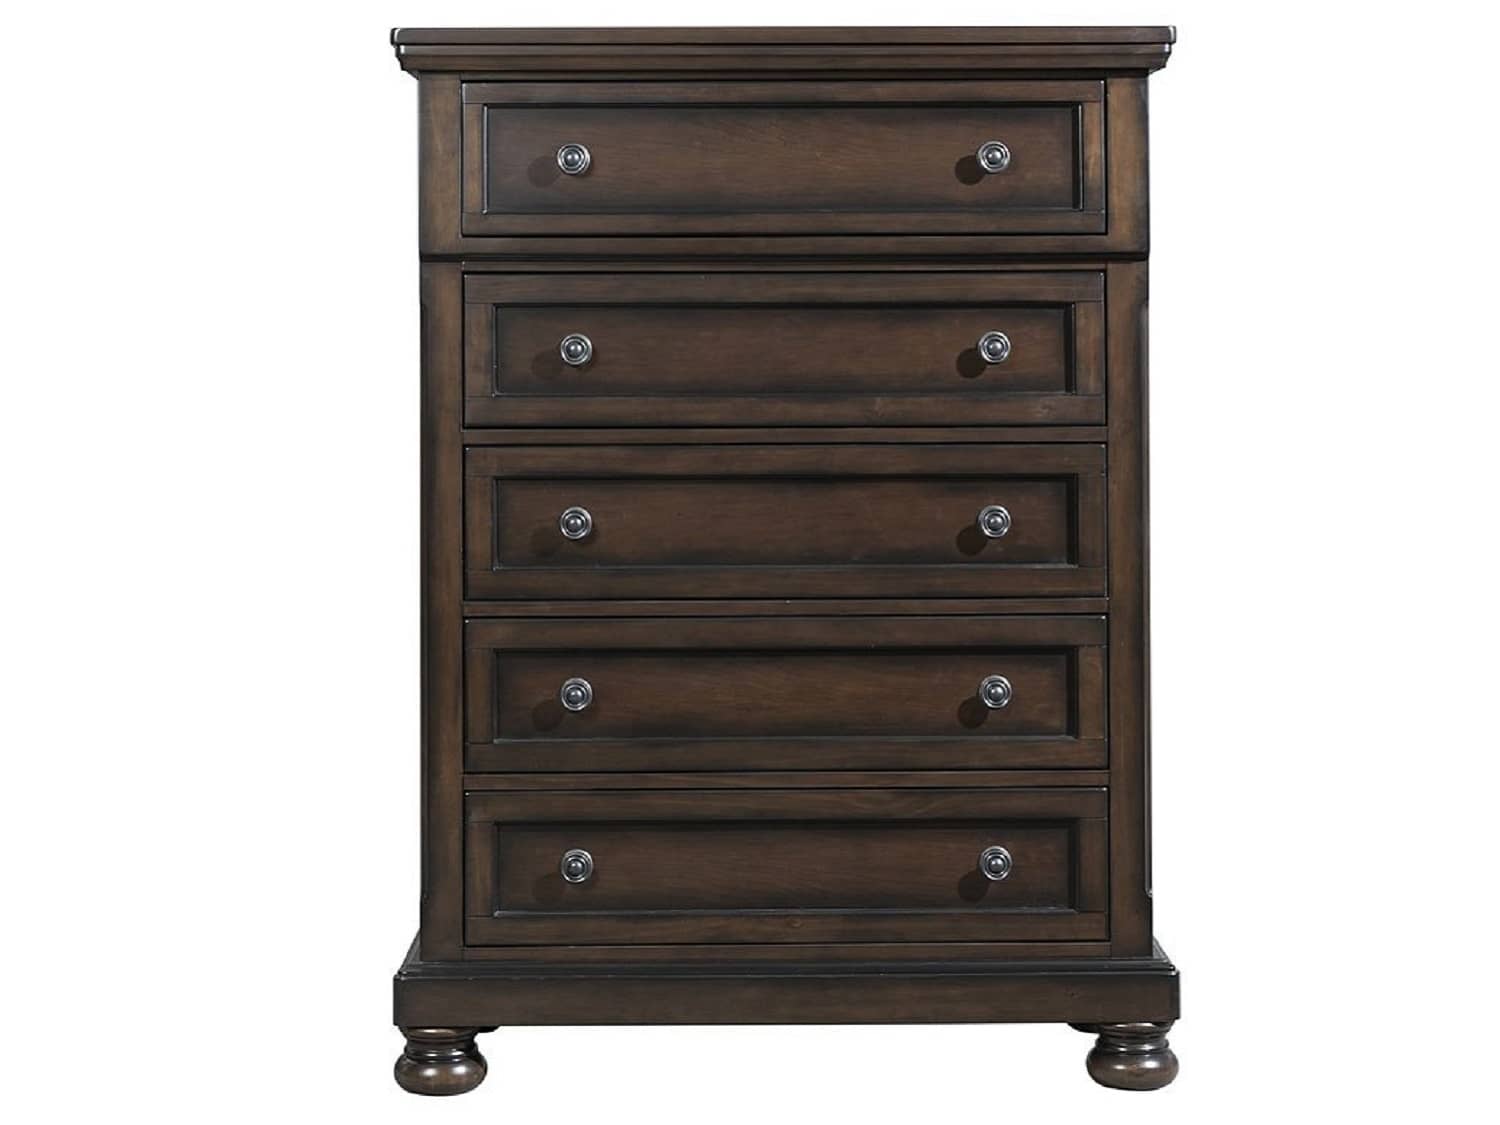 CHARLTON Chest of Drawers - Front